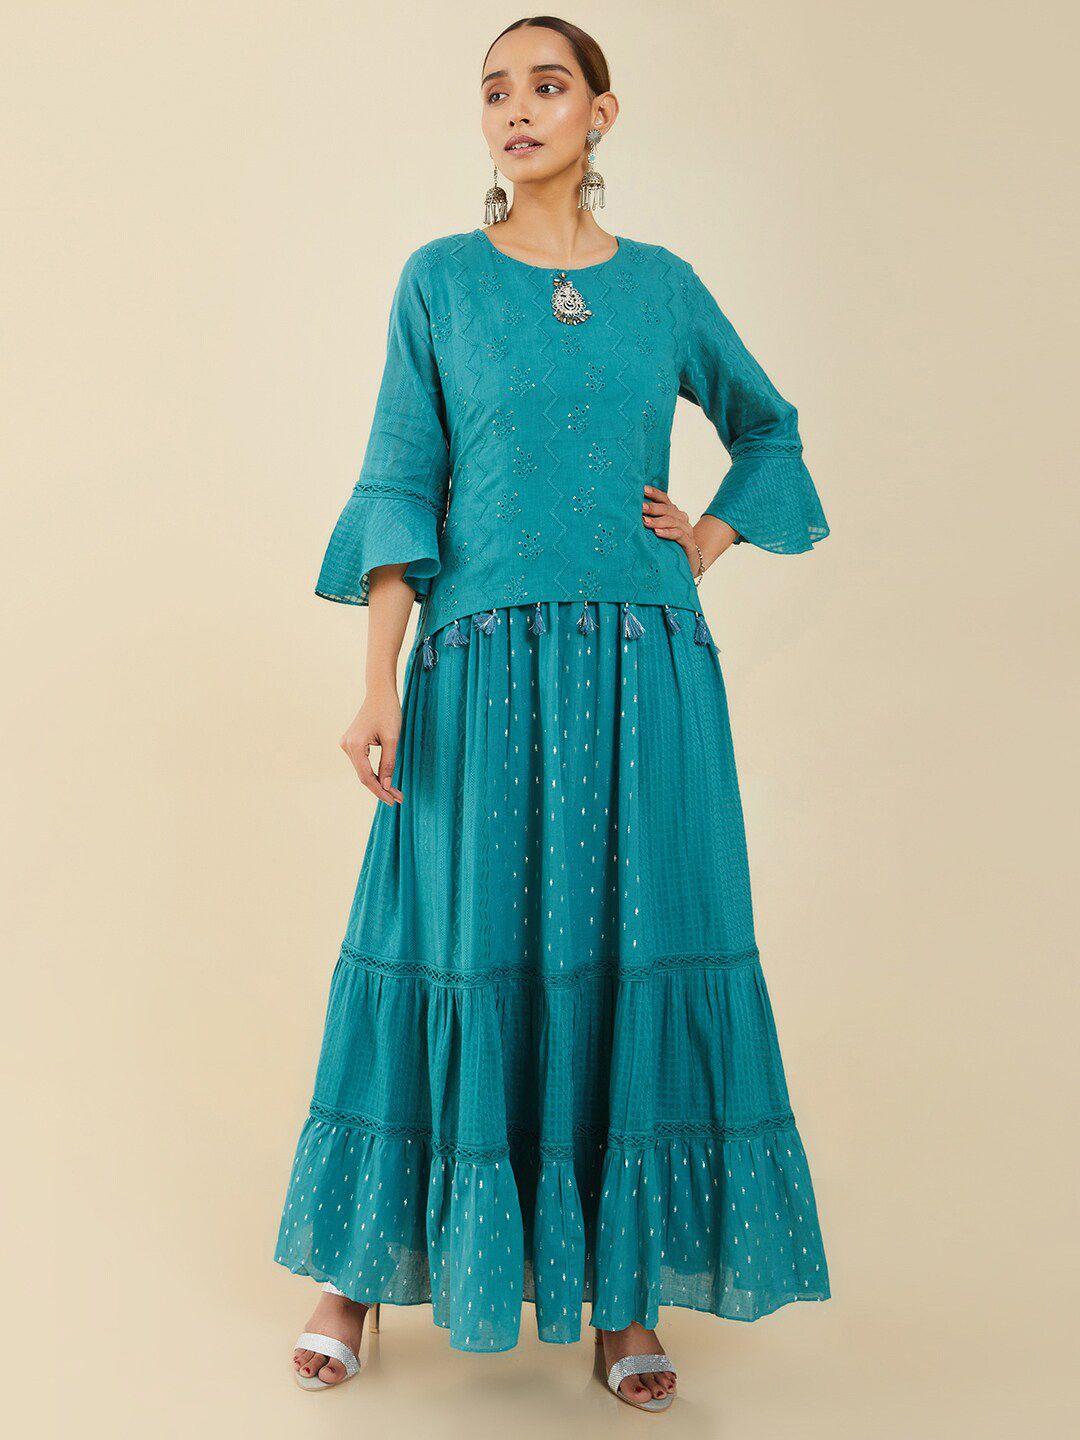 soch-teal-embroidered-ethnic-maxi-dress